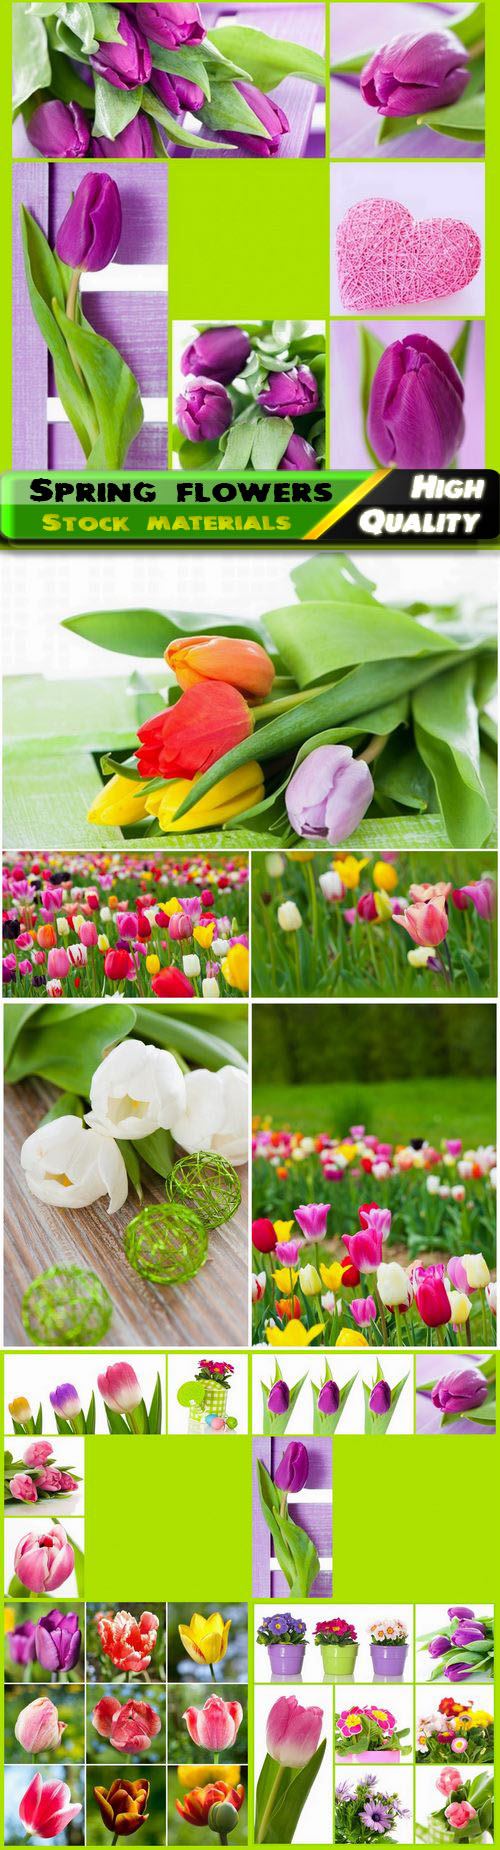 ollage and fields with spring flowers and tulips 10 HQ Jpg